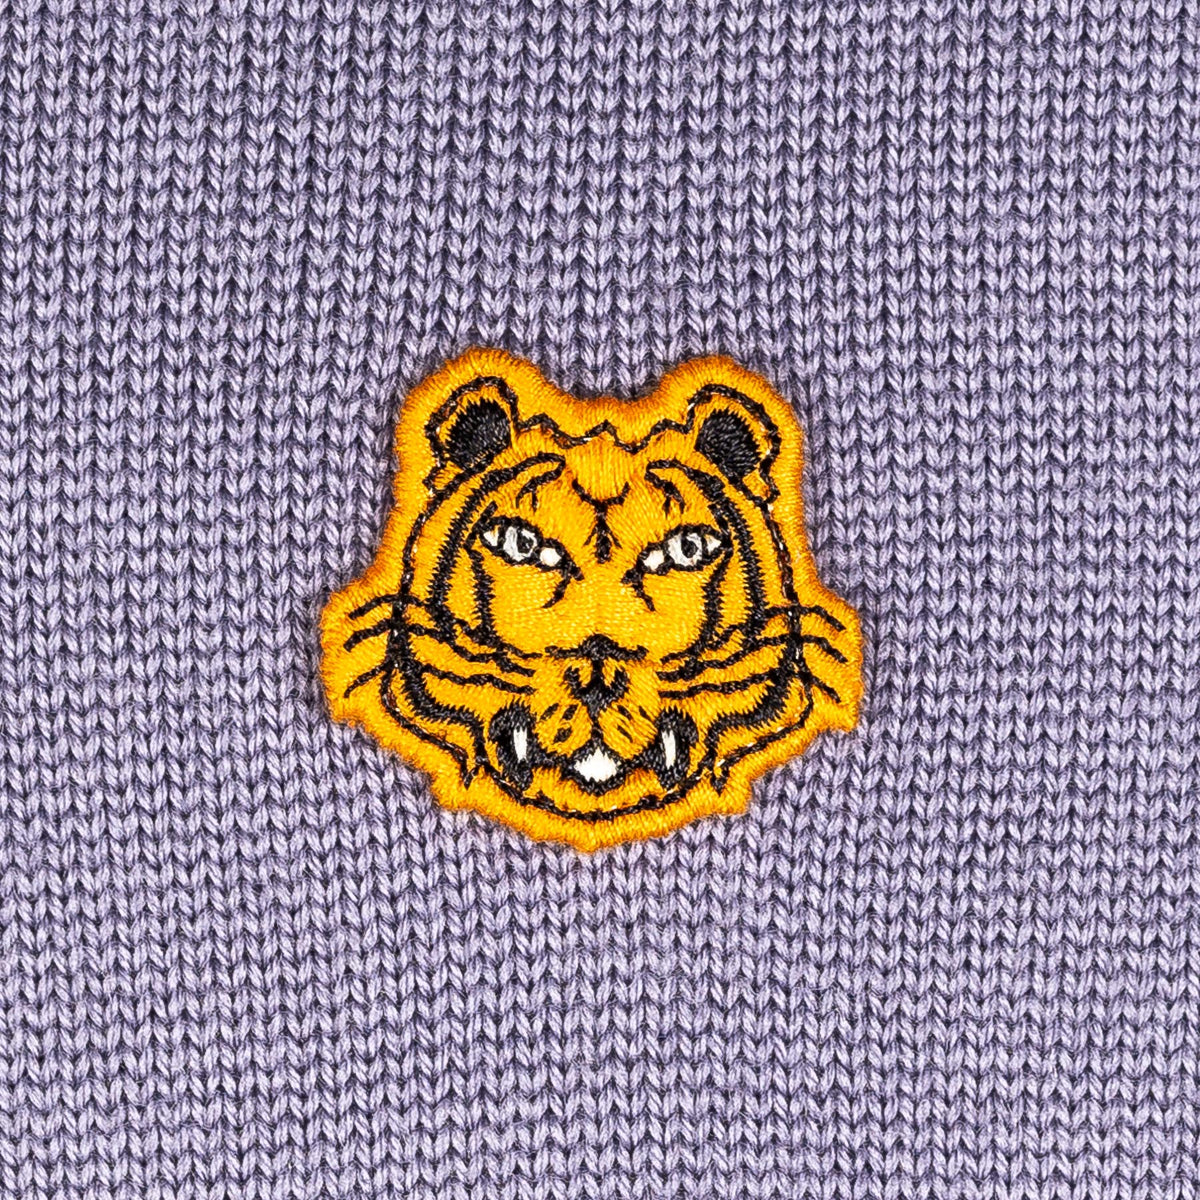 Load image into Gallery viewer, Kenzo Violet Tiger Crest Classic Knit
